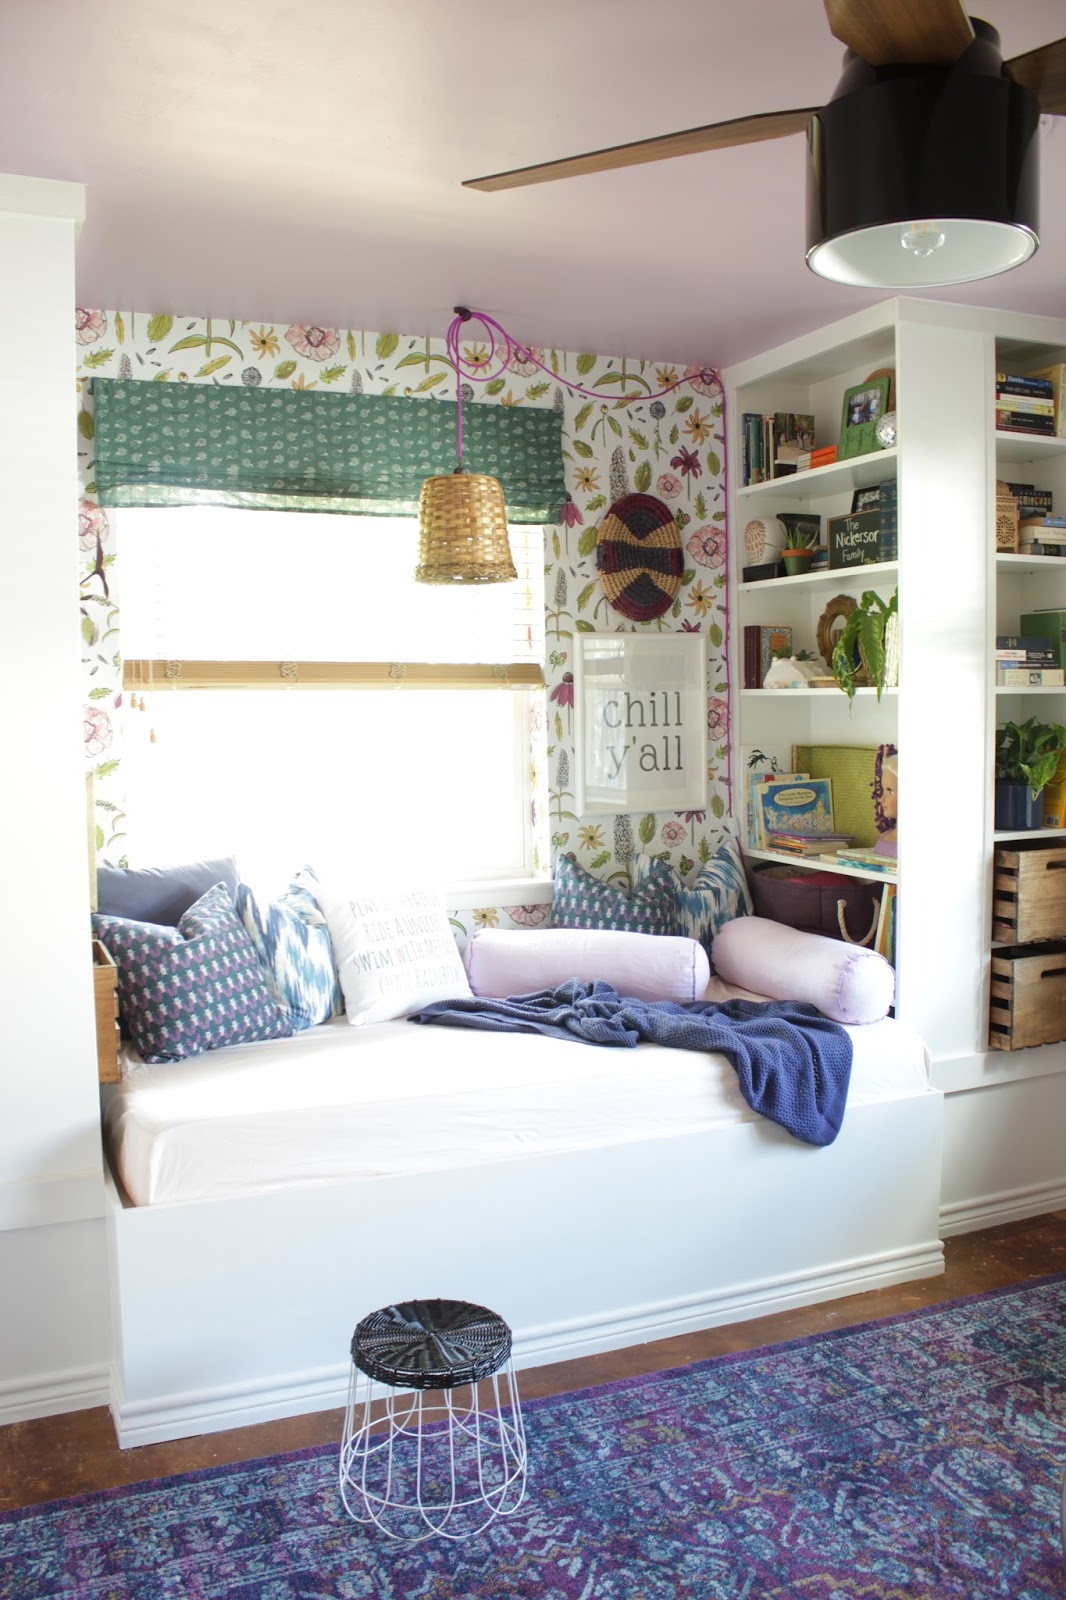 House Homemade Built In Daybed With Ikea Bookshelves